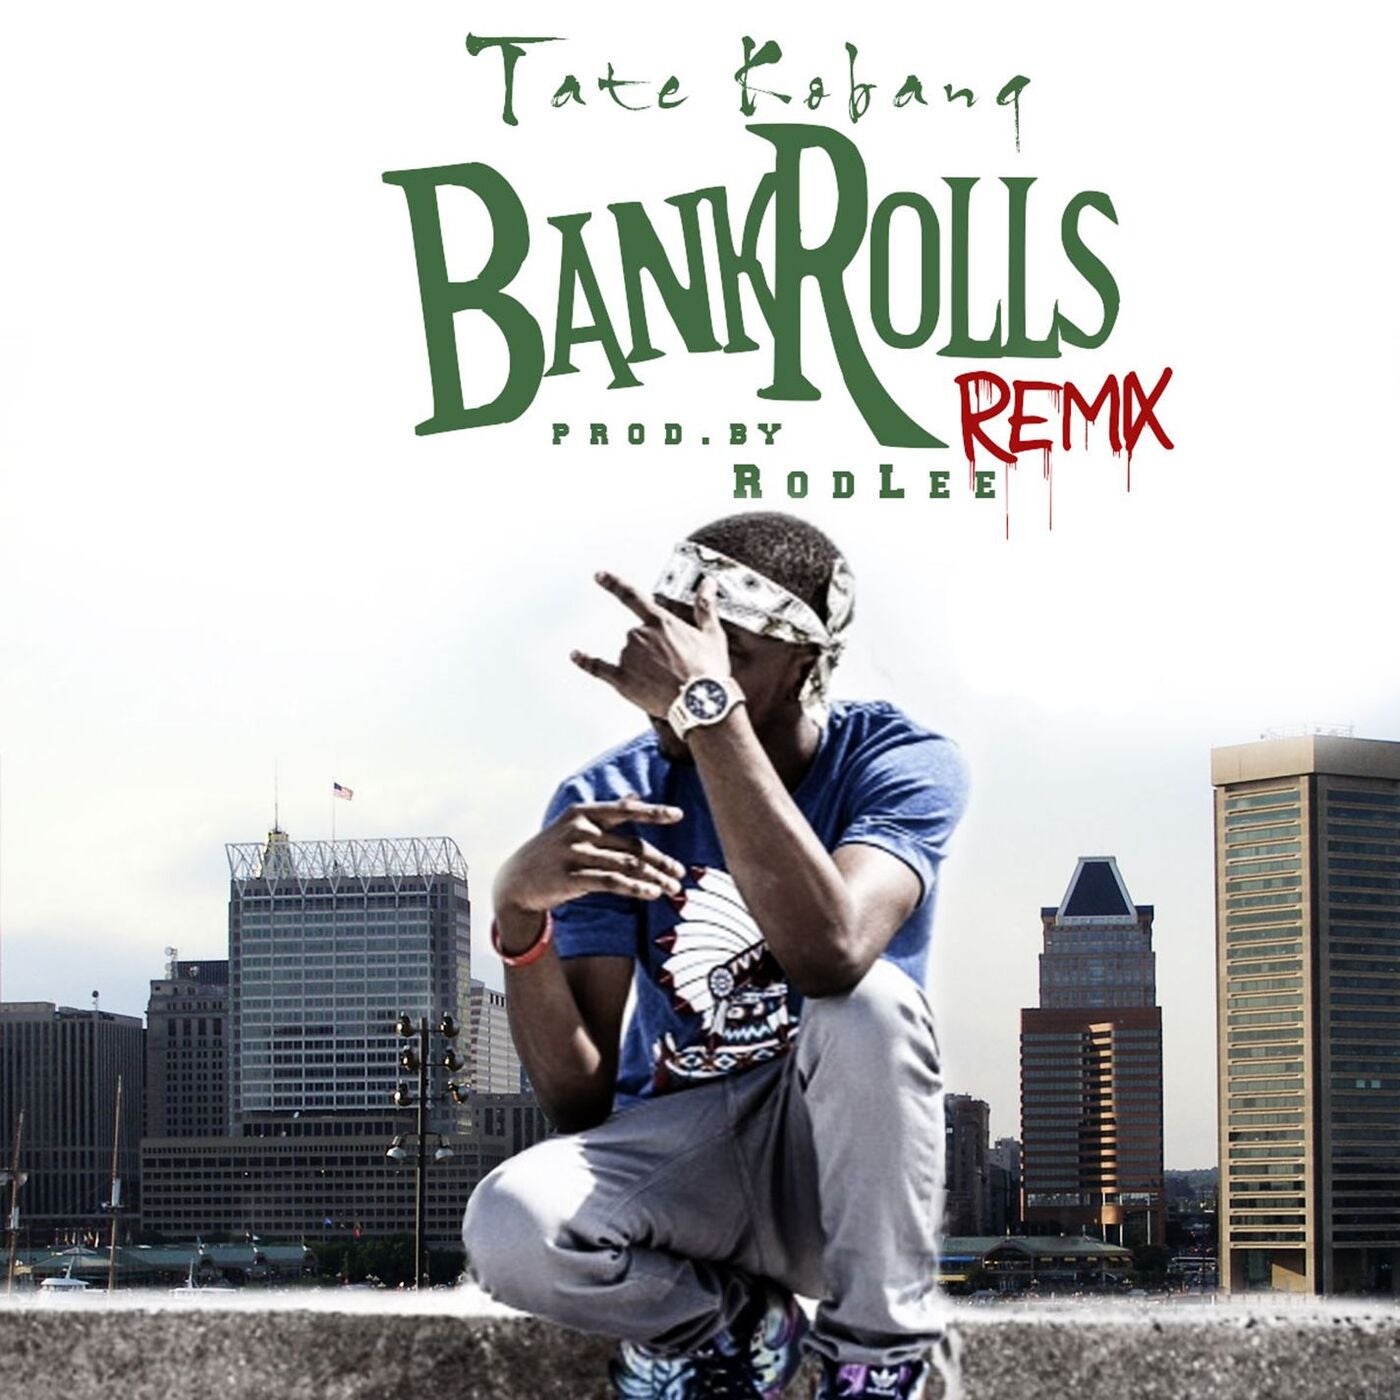 Banks remix. Bankroll. Roller Remix. Music album with Bank Cards on it and niggas.